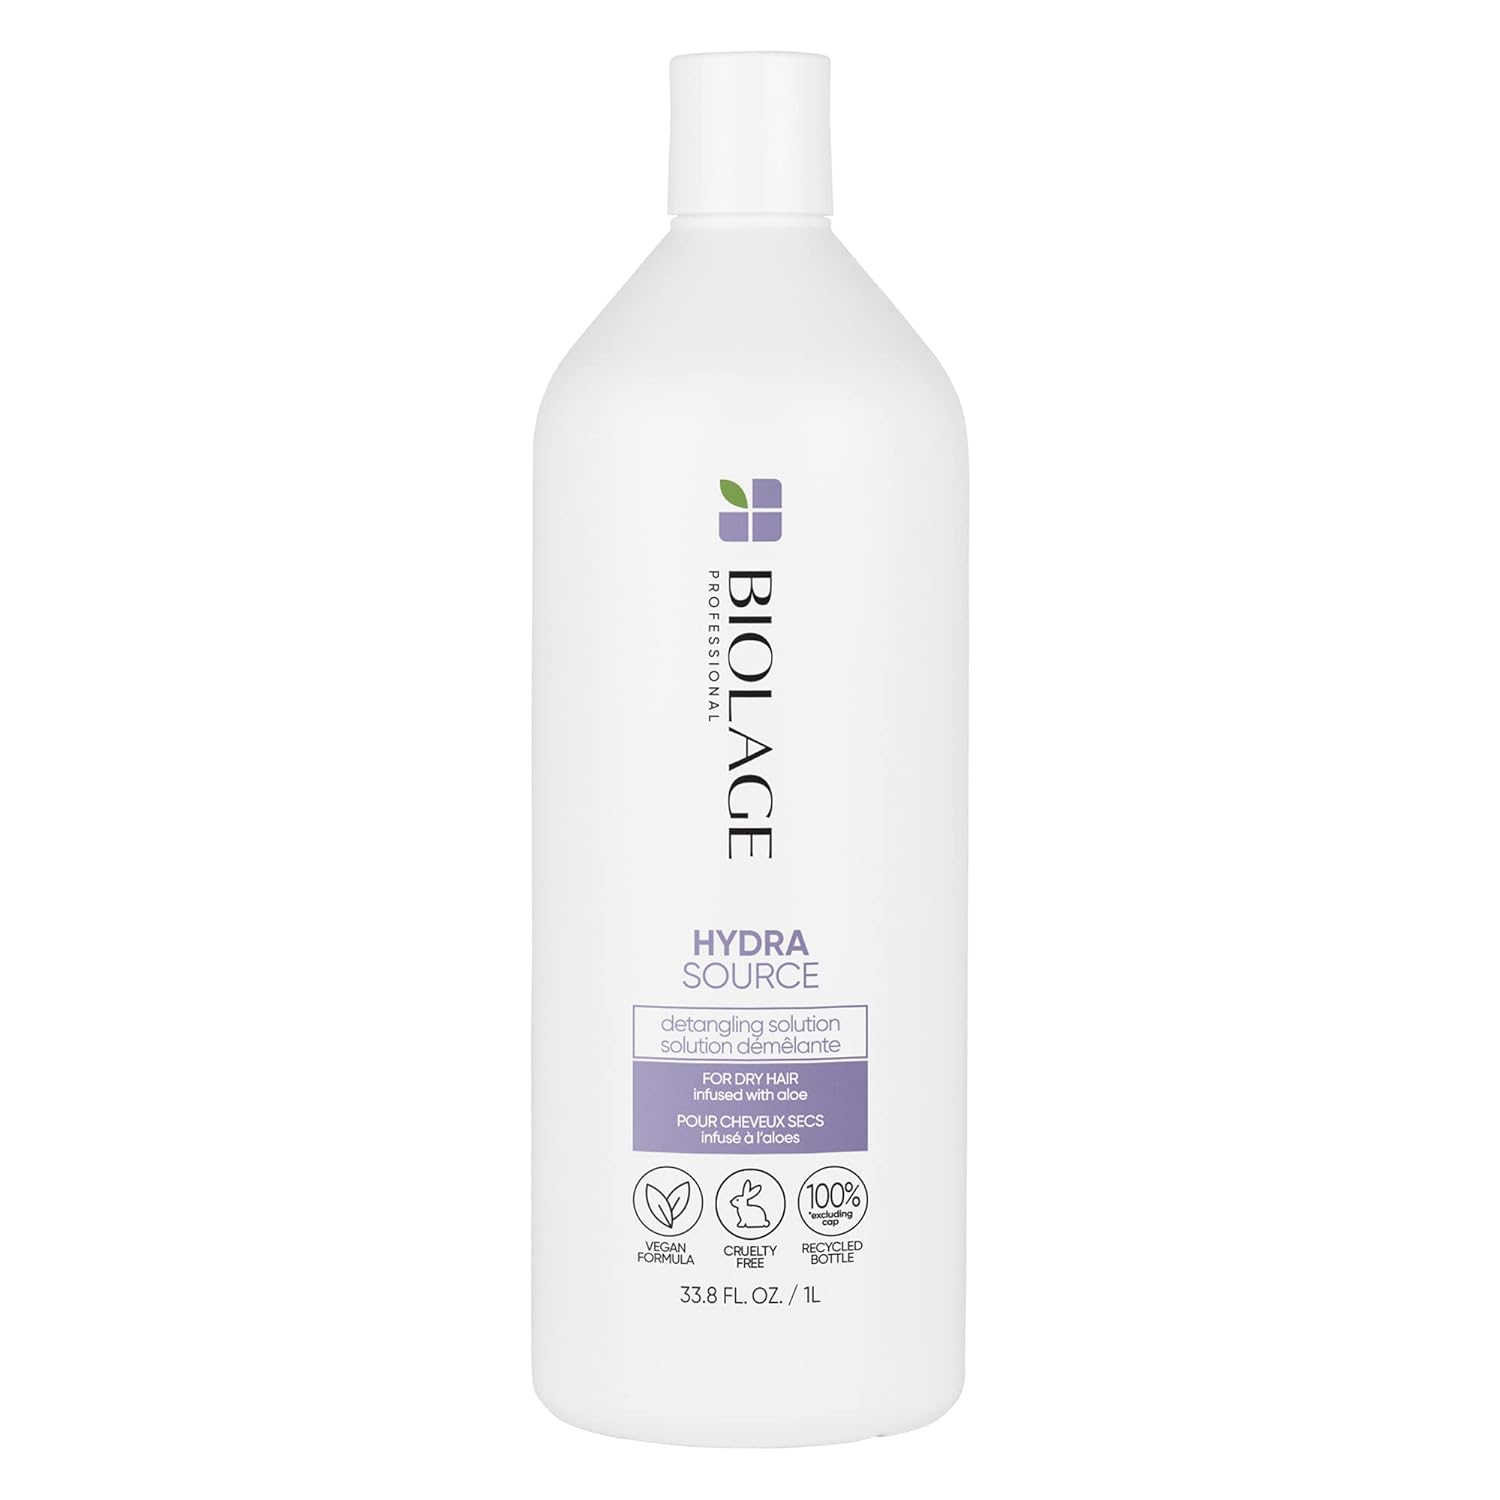 Biolage Hydra Source Detangling Solution | Detangles & Controls Static For Less Frizz & Fly-Aways | Renews Moisture | Paraben-Free | For Dry Hair | Vegan | Cruelty Free